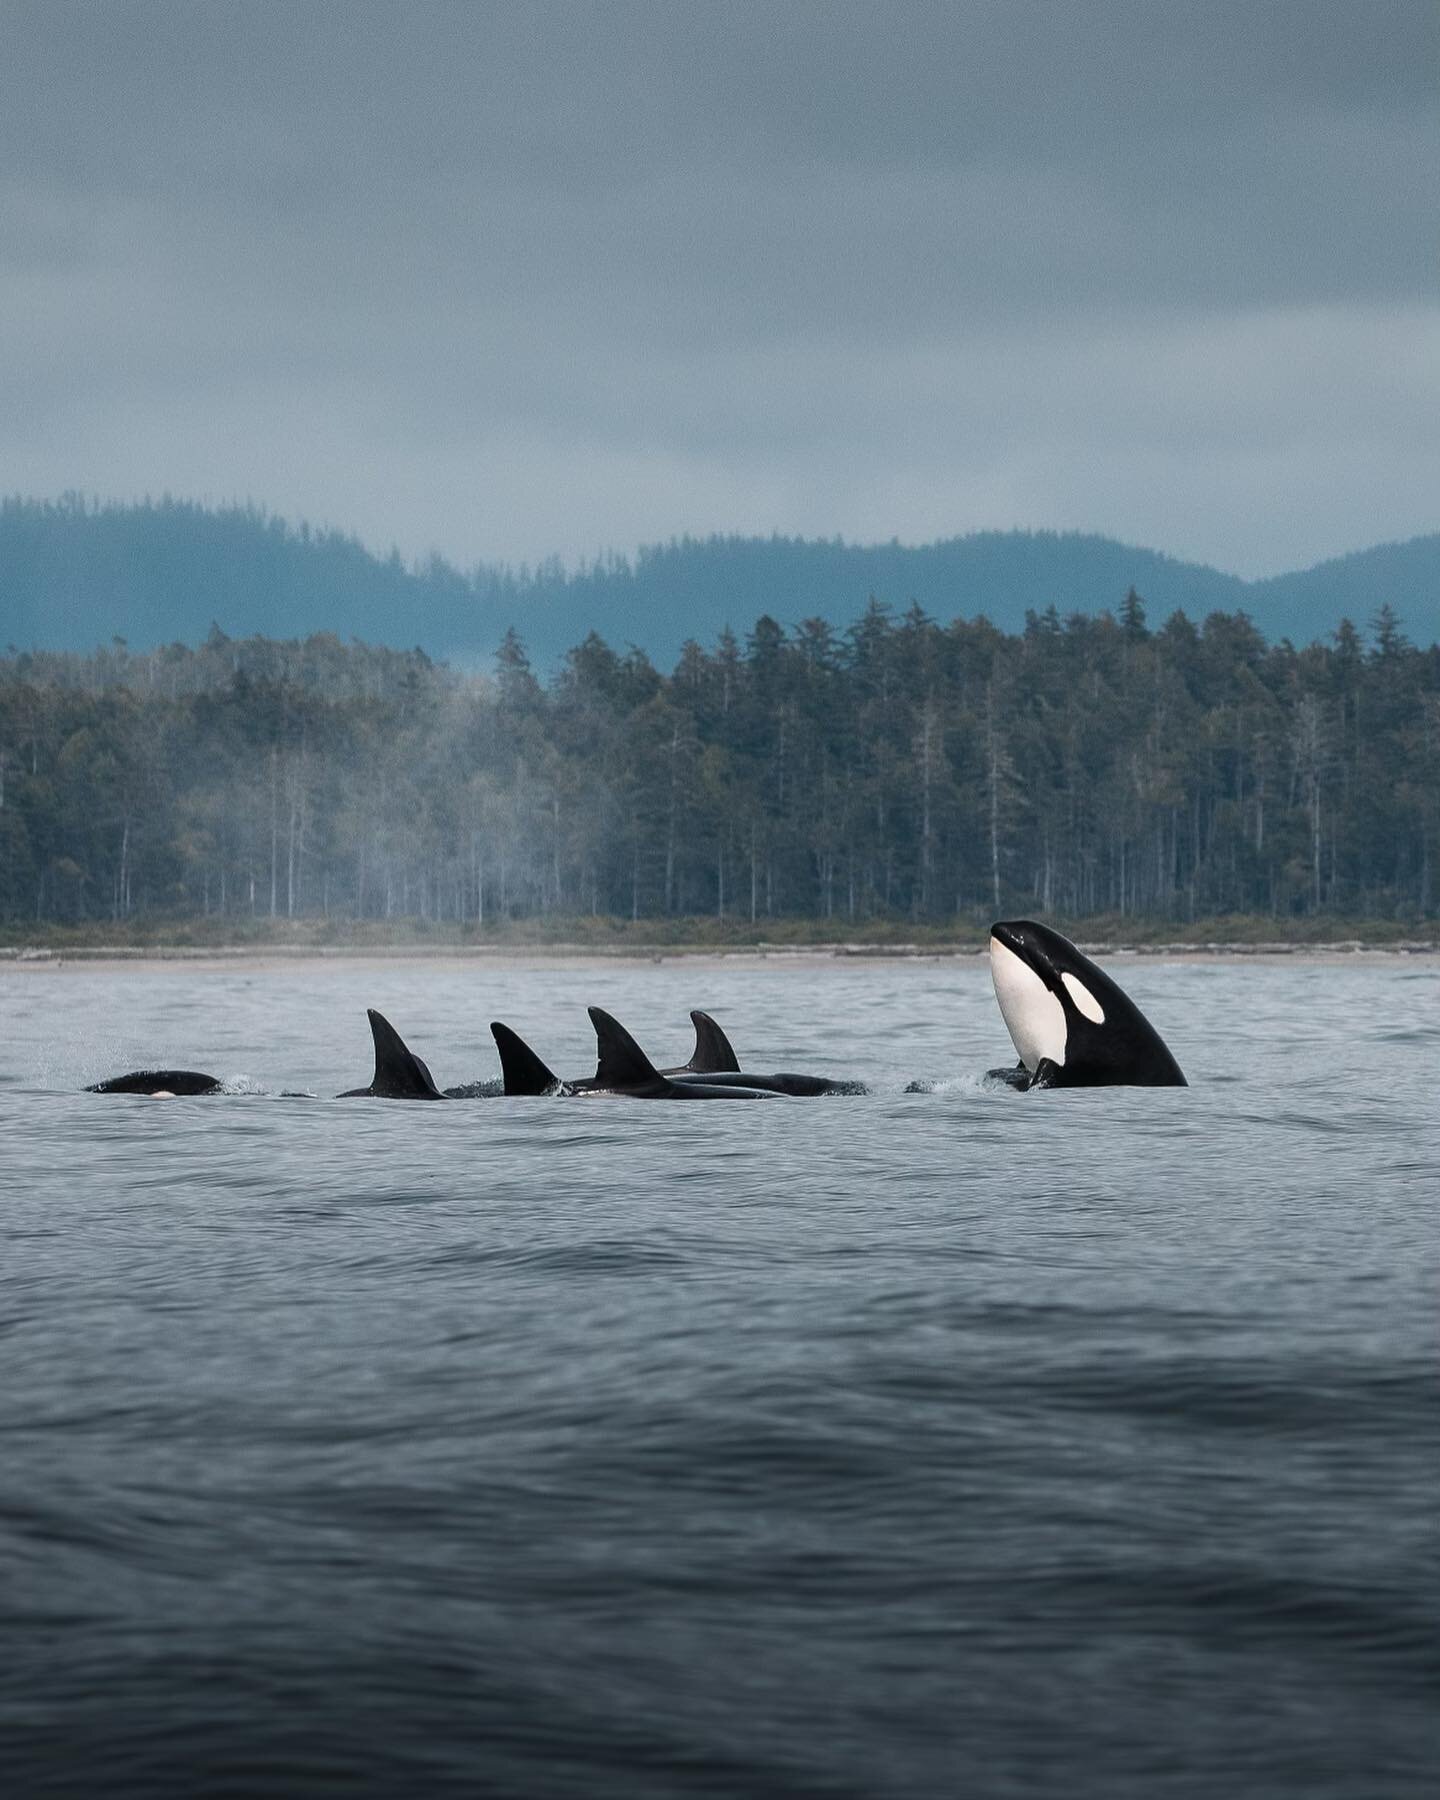 A visit from the T041&rsquo;s and T109C&rsquo;s on yesterday&rsquo;s afternoon whale watching tours. 

These Bigg&rsquo;s Killer Whales are frequent visitors to Clayoquot Sound. 

You never know what types of wildlife you will see on our tours! And o